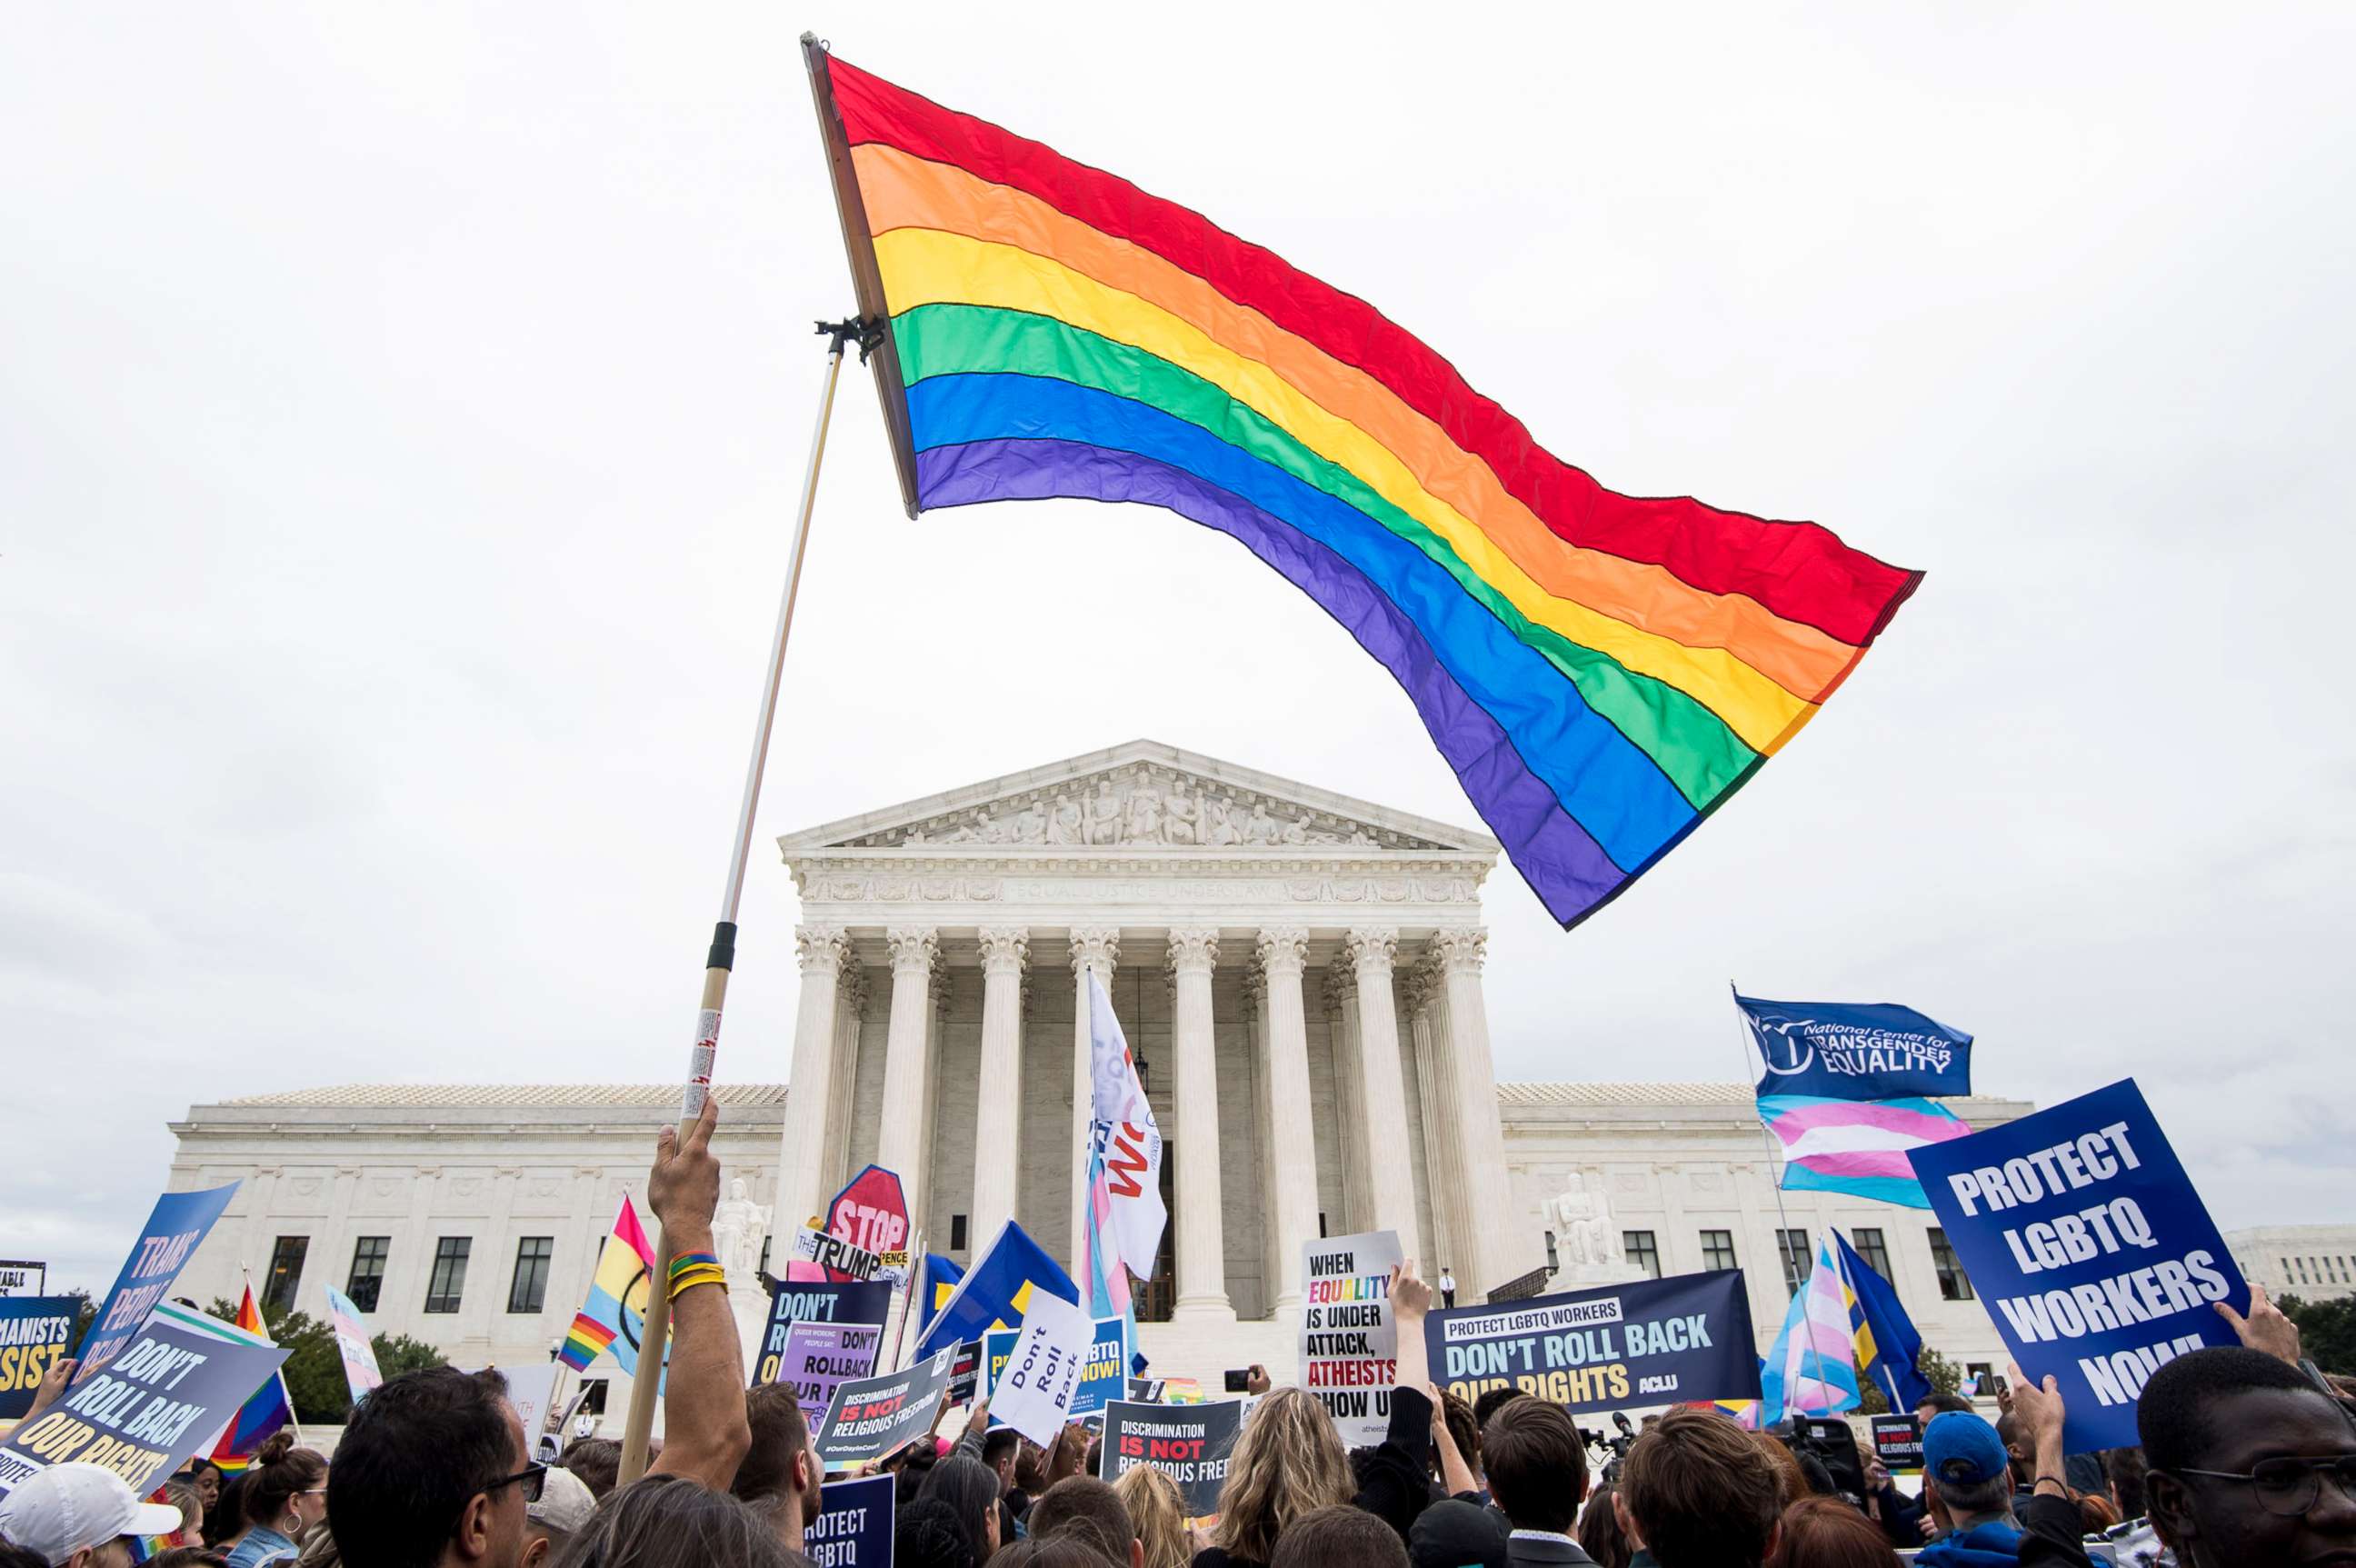 PHOTO: Protesters rally in front of the Supreme Court as it hears arguments on whether gay and transgender people are covered by a federal law barring employment discrimination on the basis of sex on Oct. 8, 2019.